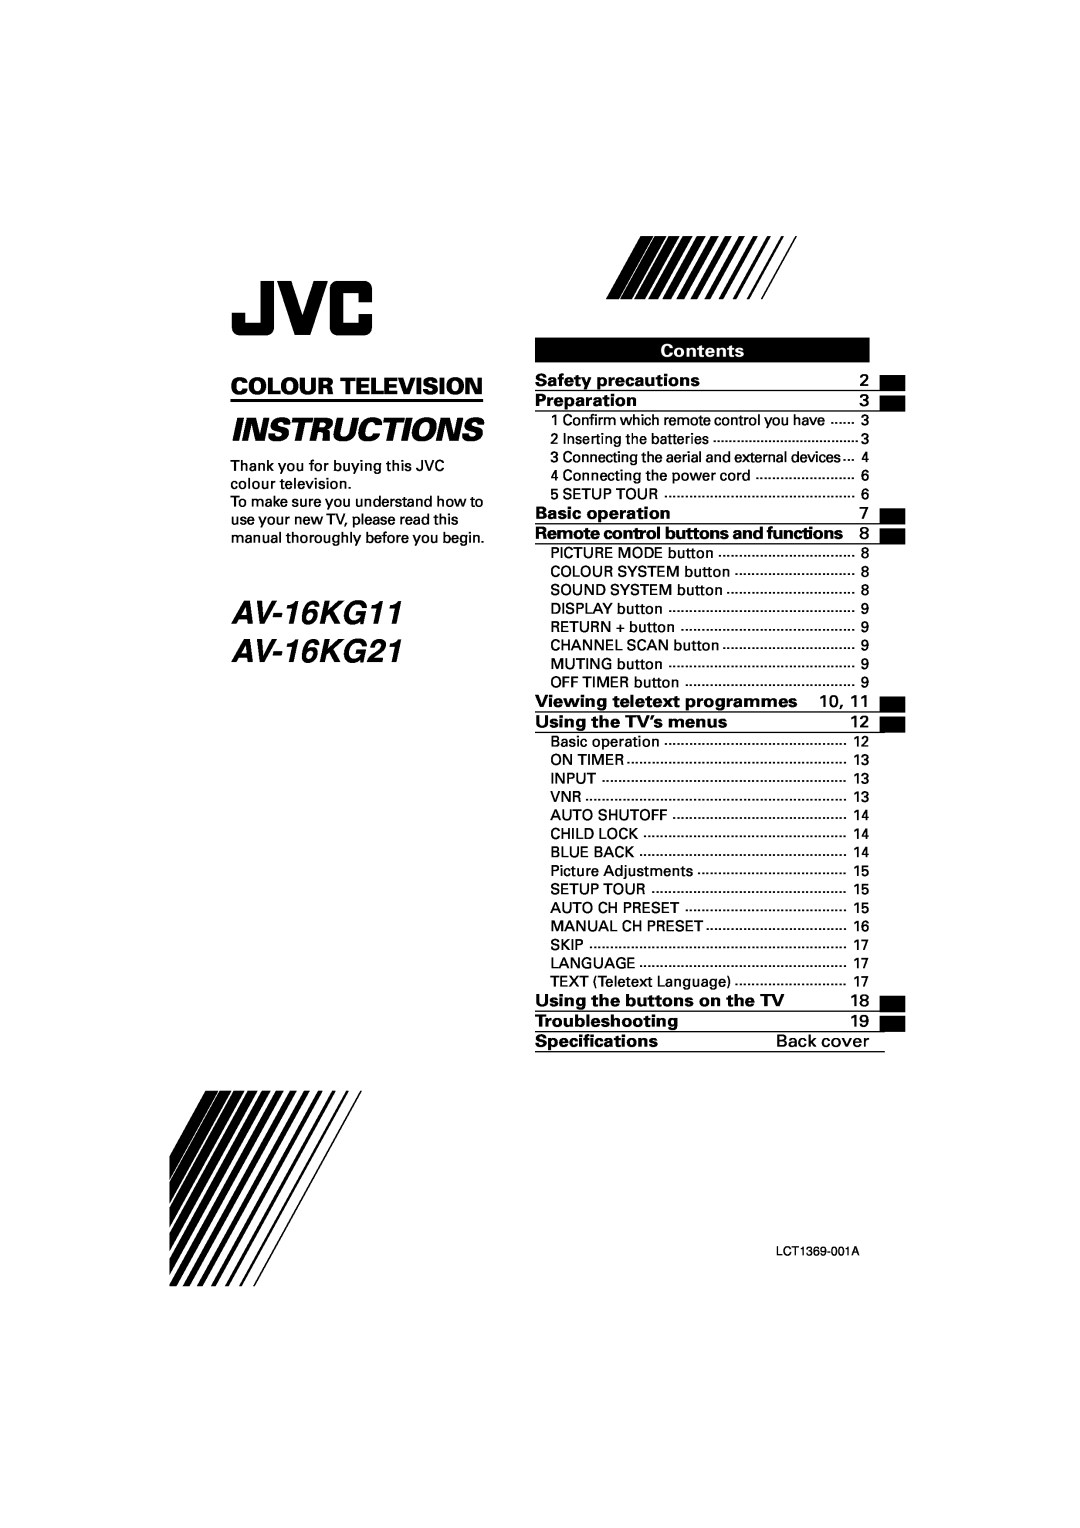 JVC AV-16KG21 specifications Safety precautions, Preparation, Basic operation, Remote control buttons and functions 